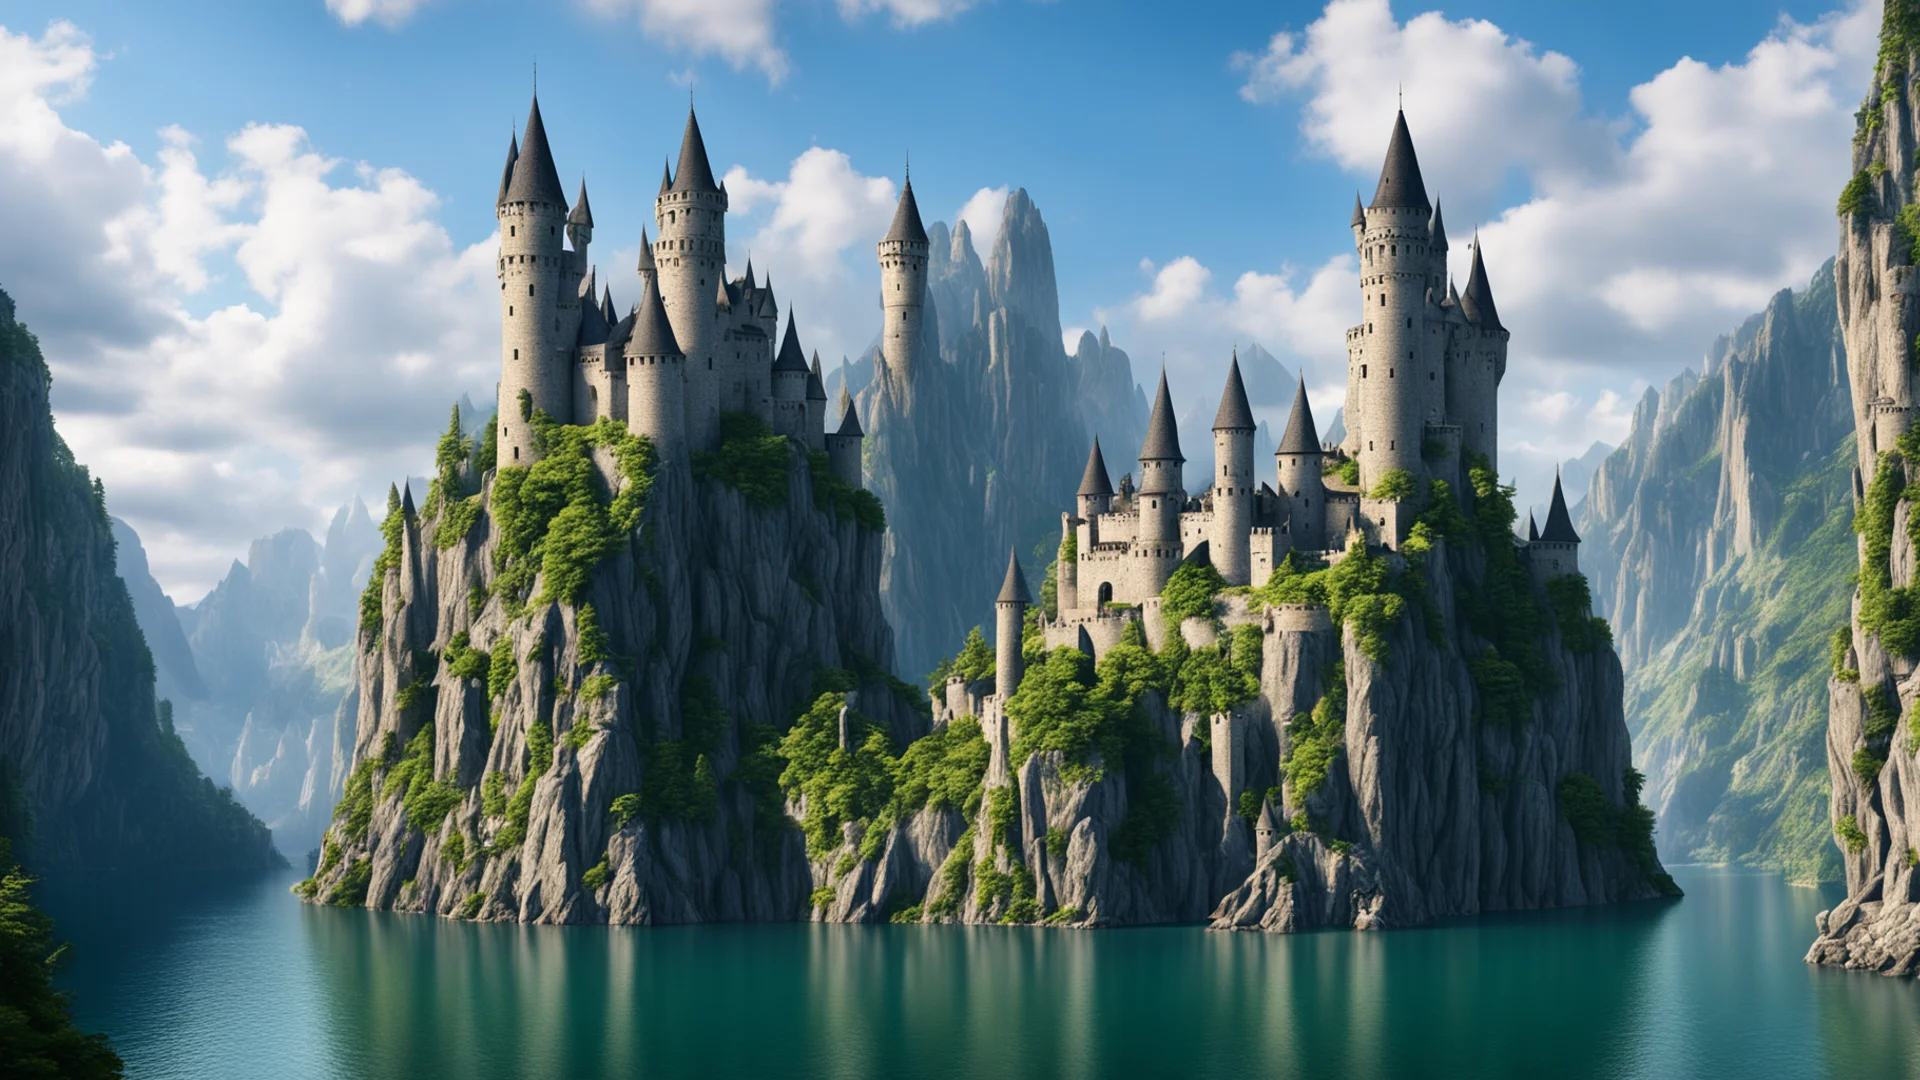 epic cliffs castle over lake large spiraling towers on castle epic shot realistic unreal trending wide